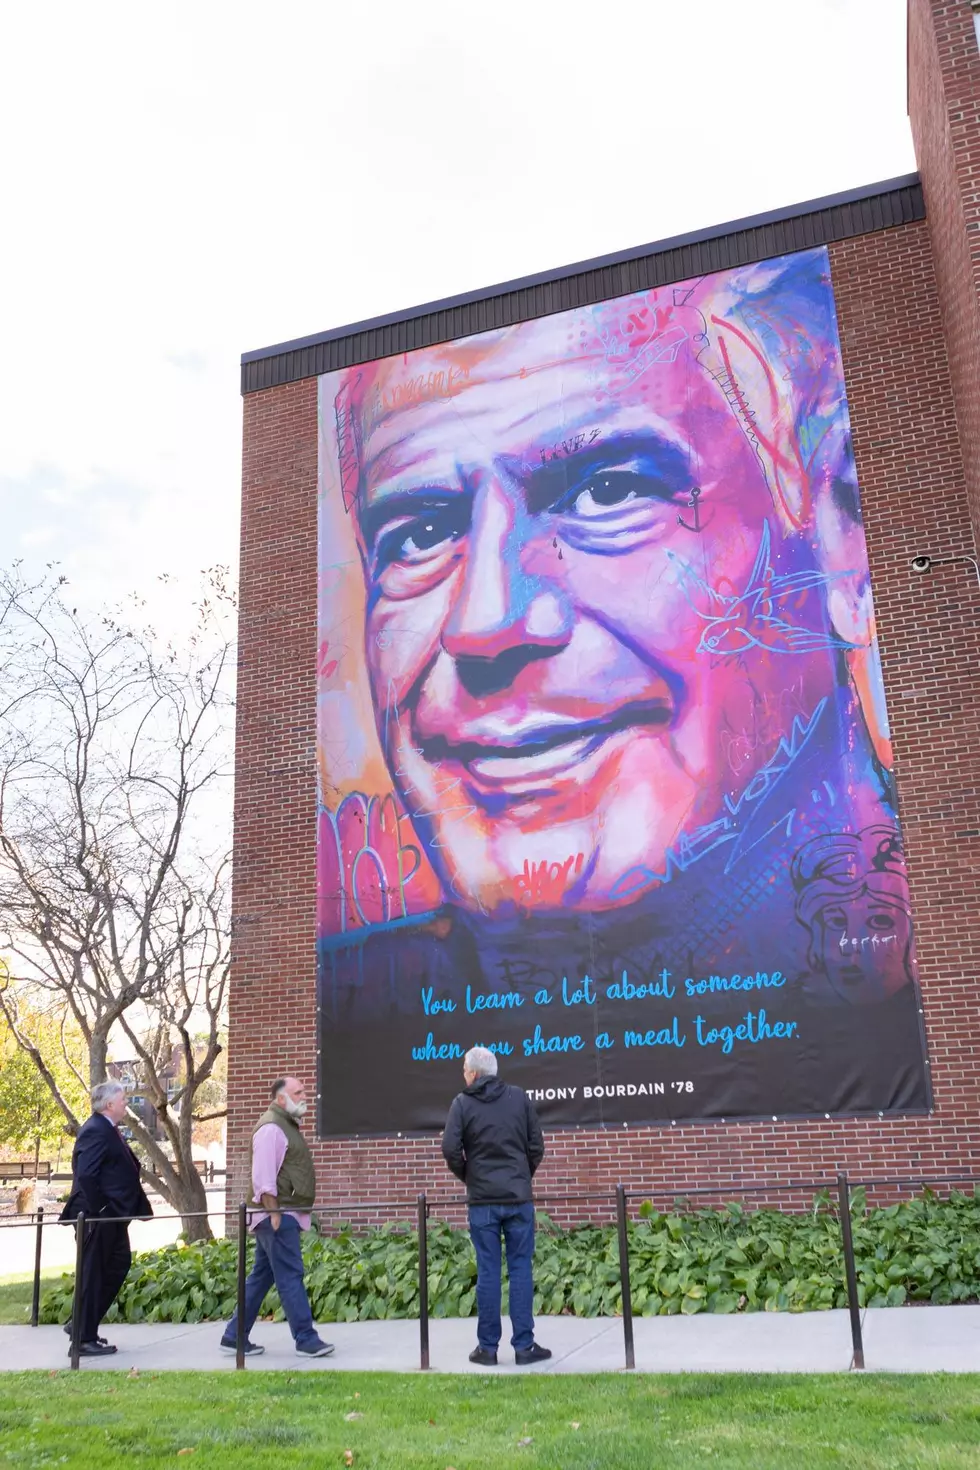 Culinary Honors Anthony Bourdain With Campus Memorial